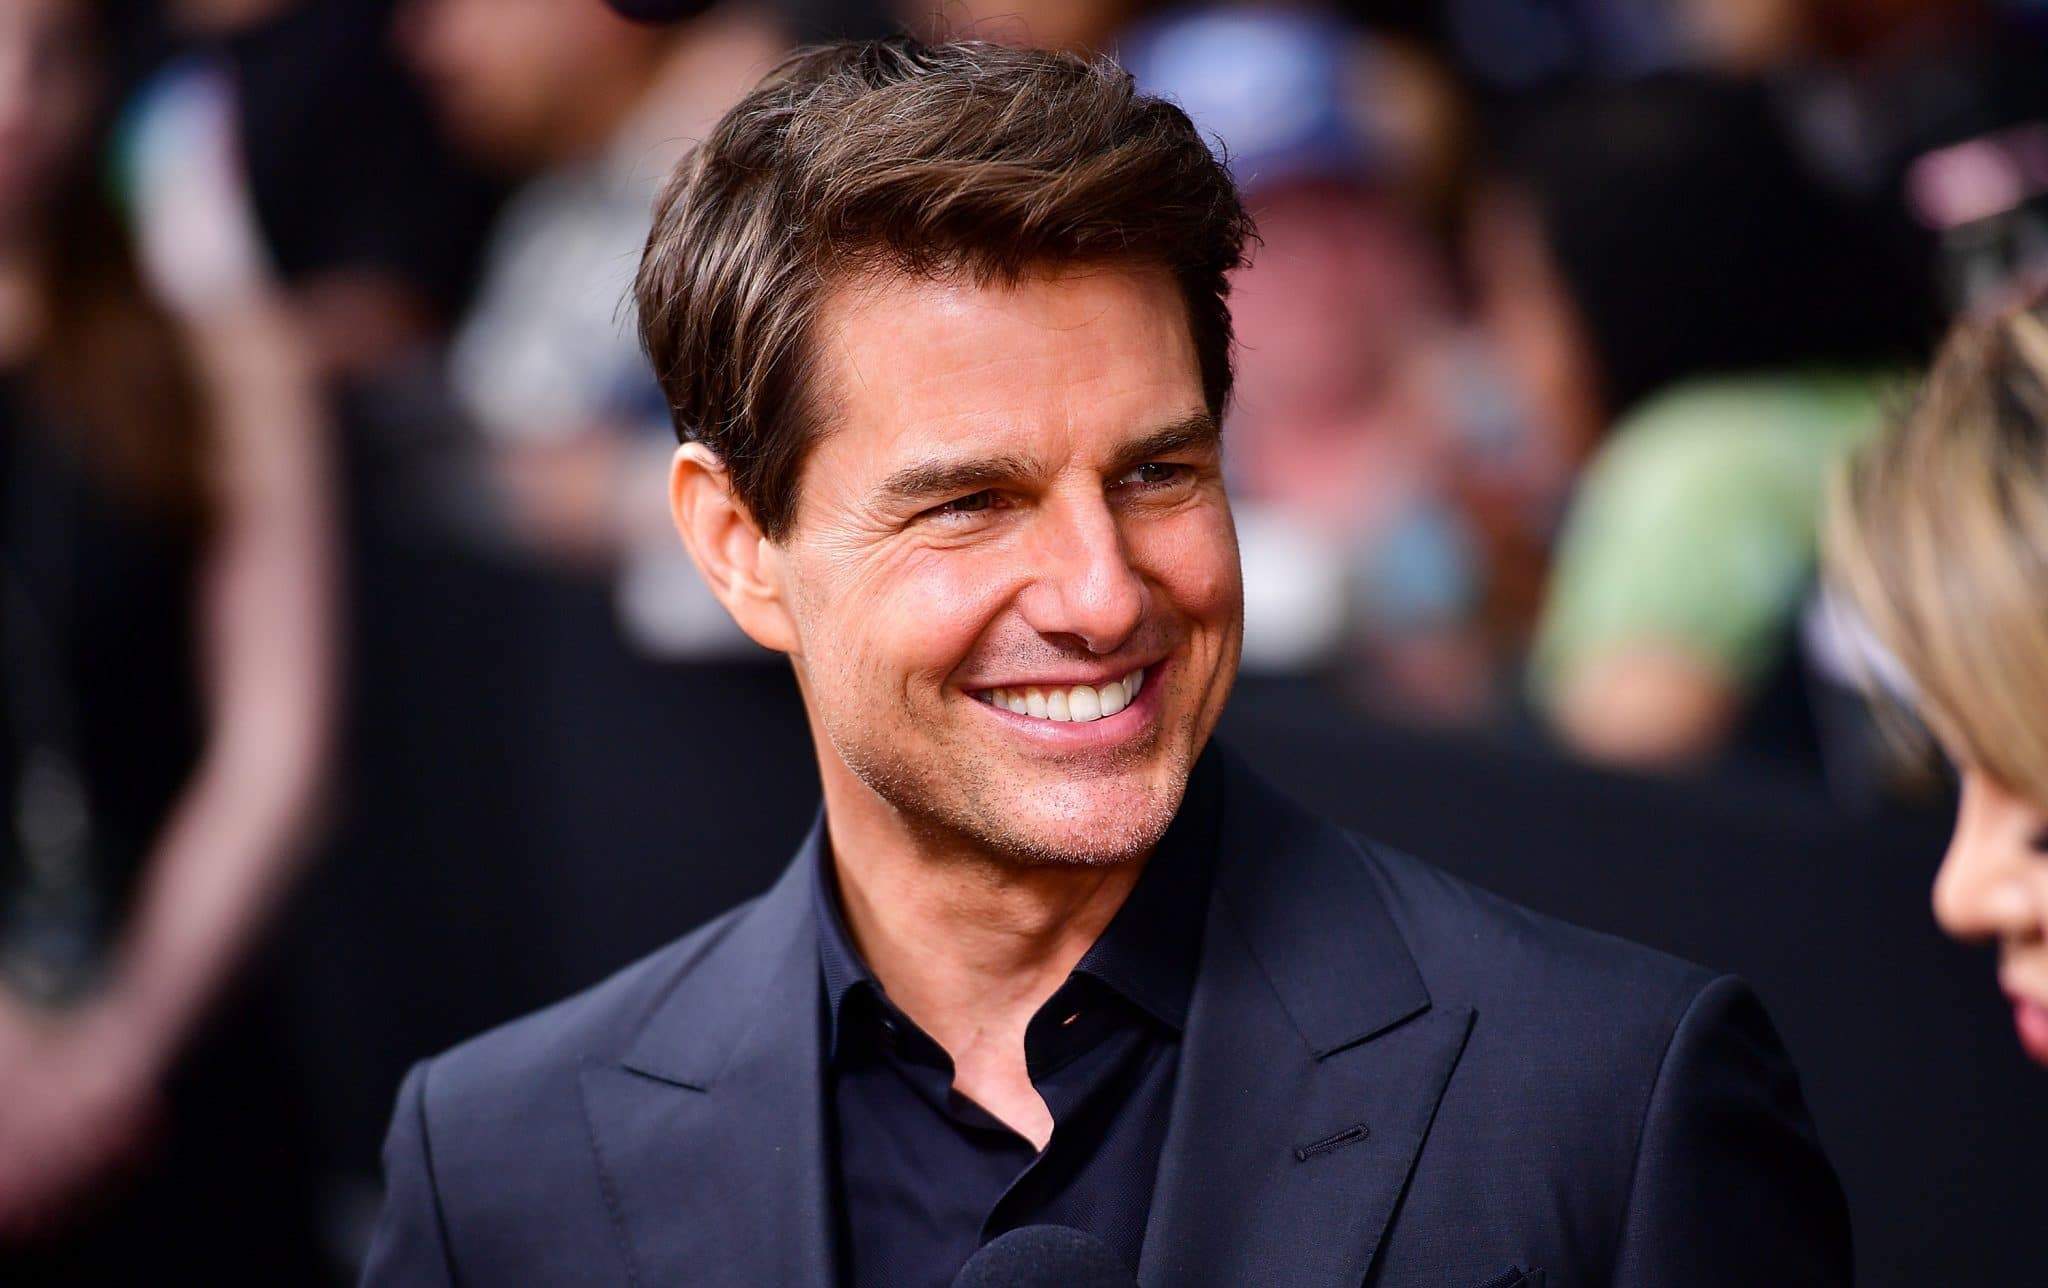 Tom cruise net worth, lifestyle and career